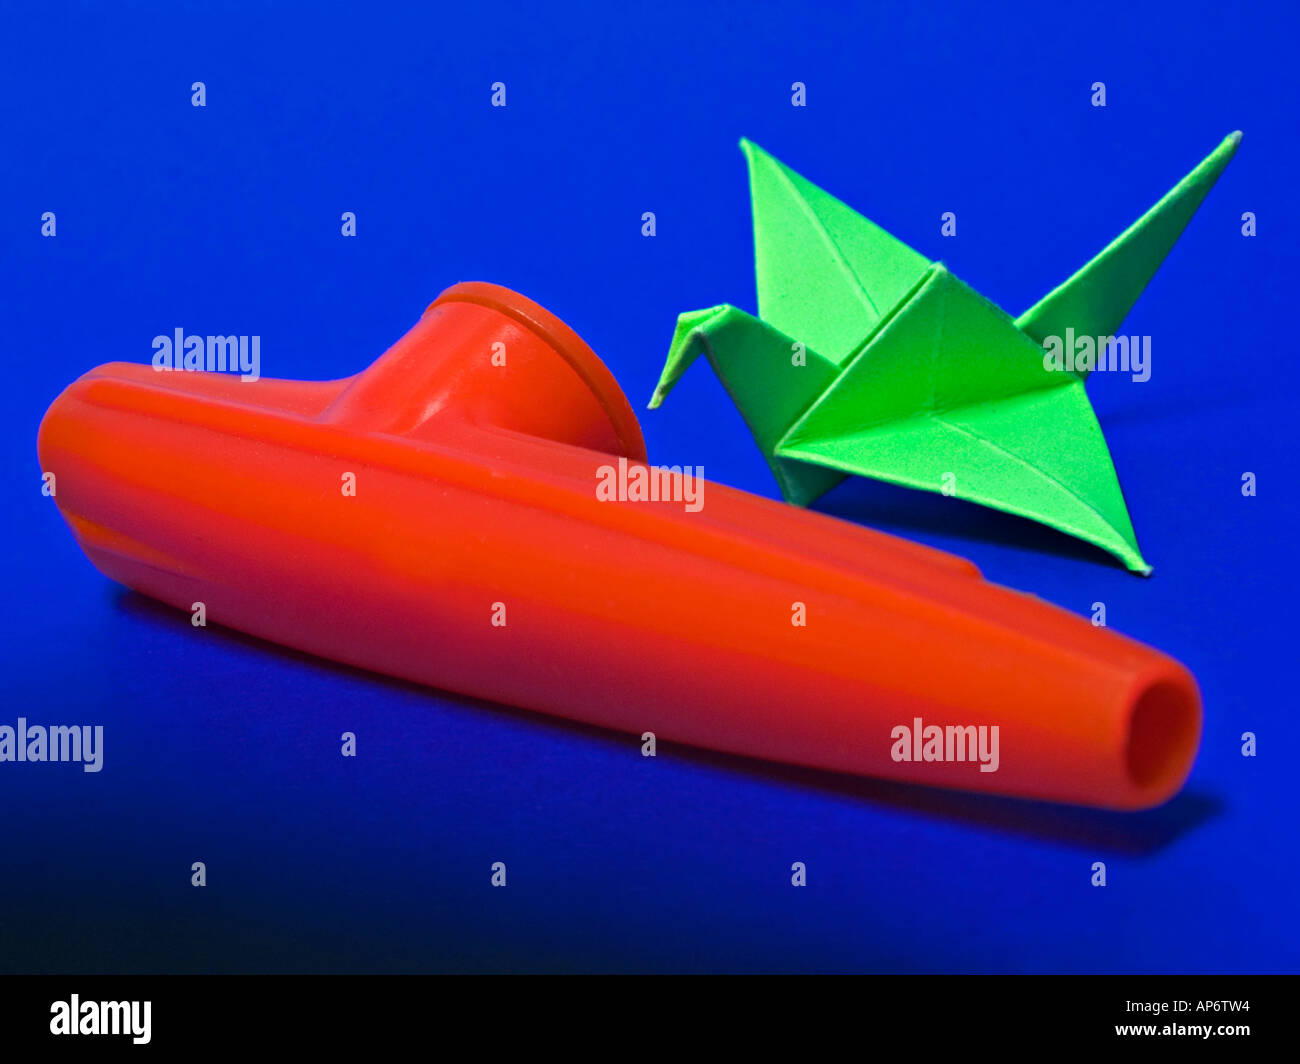 kazoo and a paper swan on blue background Stock Photo